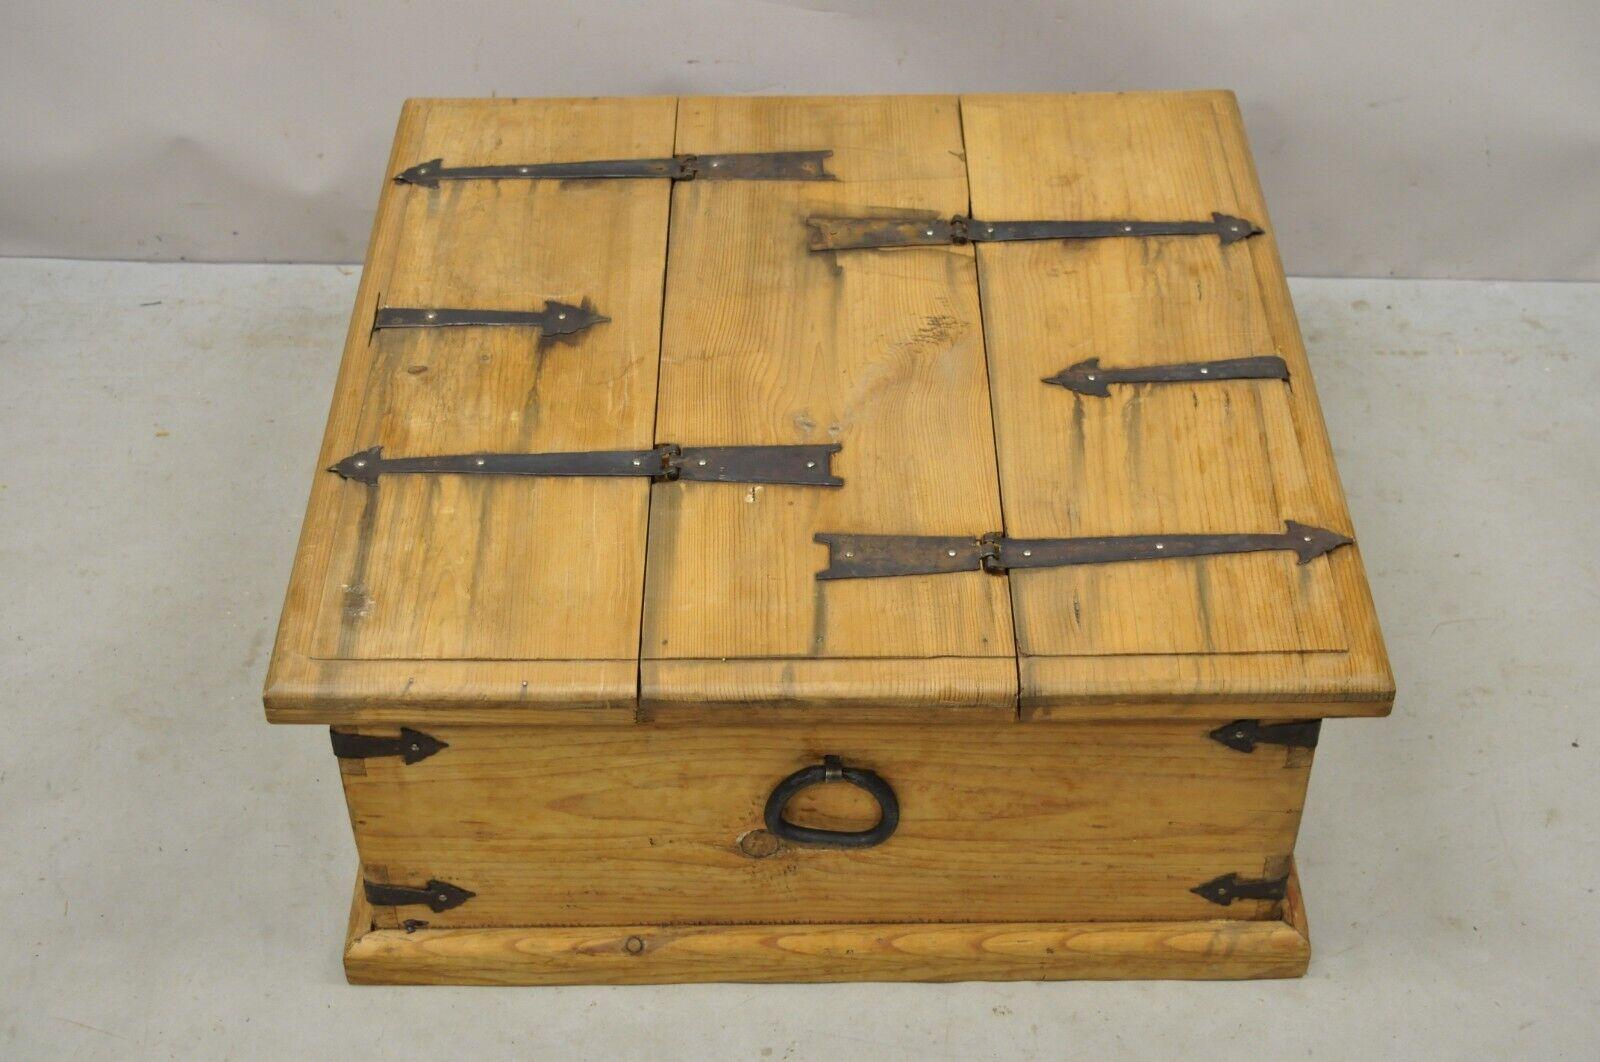 Country Farmhouse Style Mexican Double Lid Wooden Coffee Table Storage Trunk. Item features a double sided lid, cast iron hardware, solid wood construction, distressed finish, very nice vintage item, great style and form. Circa Late 20th Century.